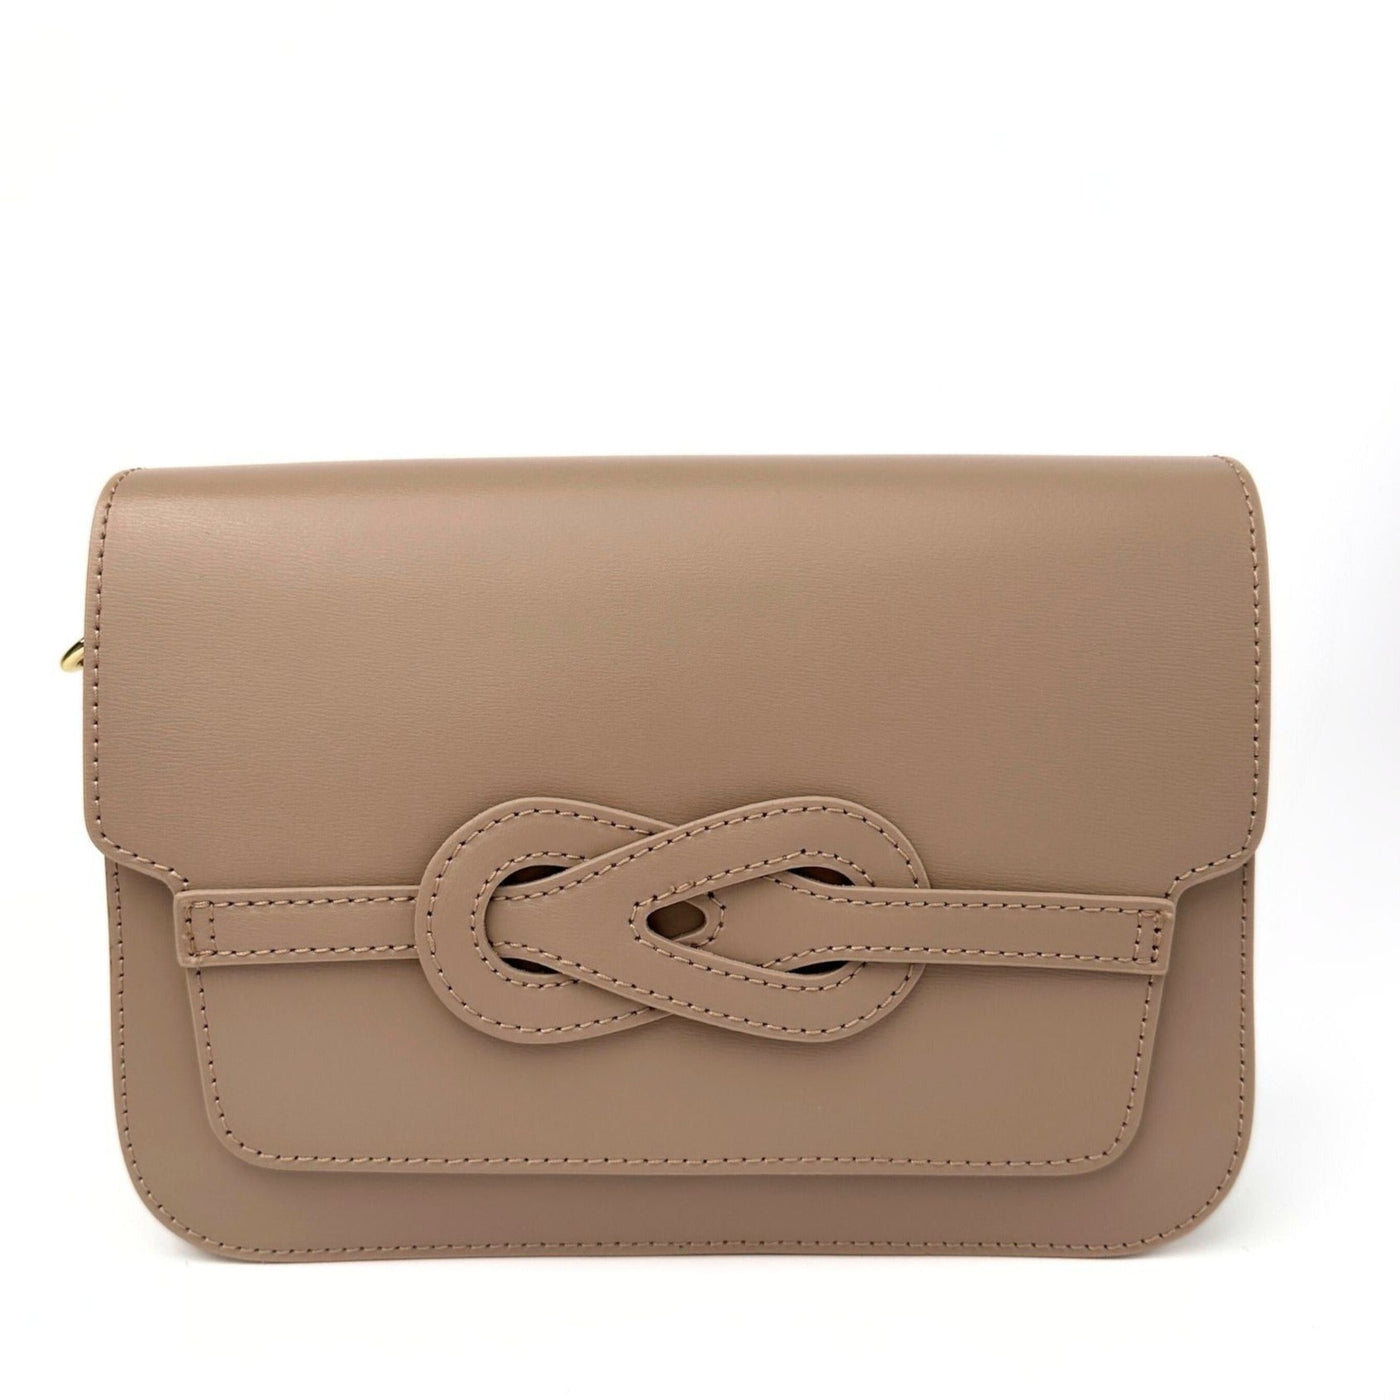 Leather bag "Naples", Light Taupe